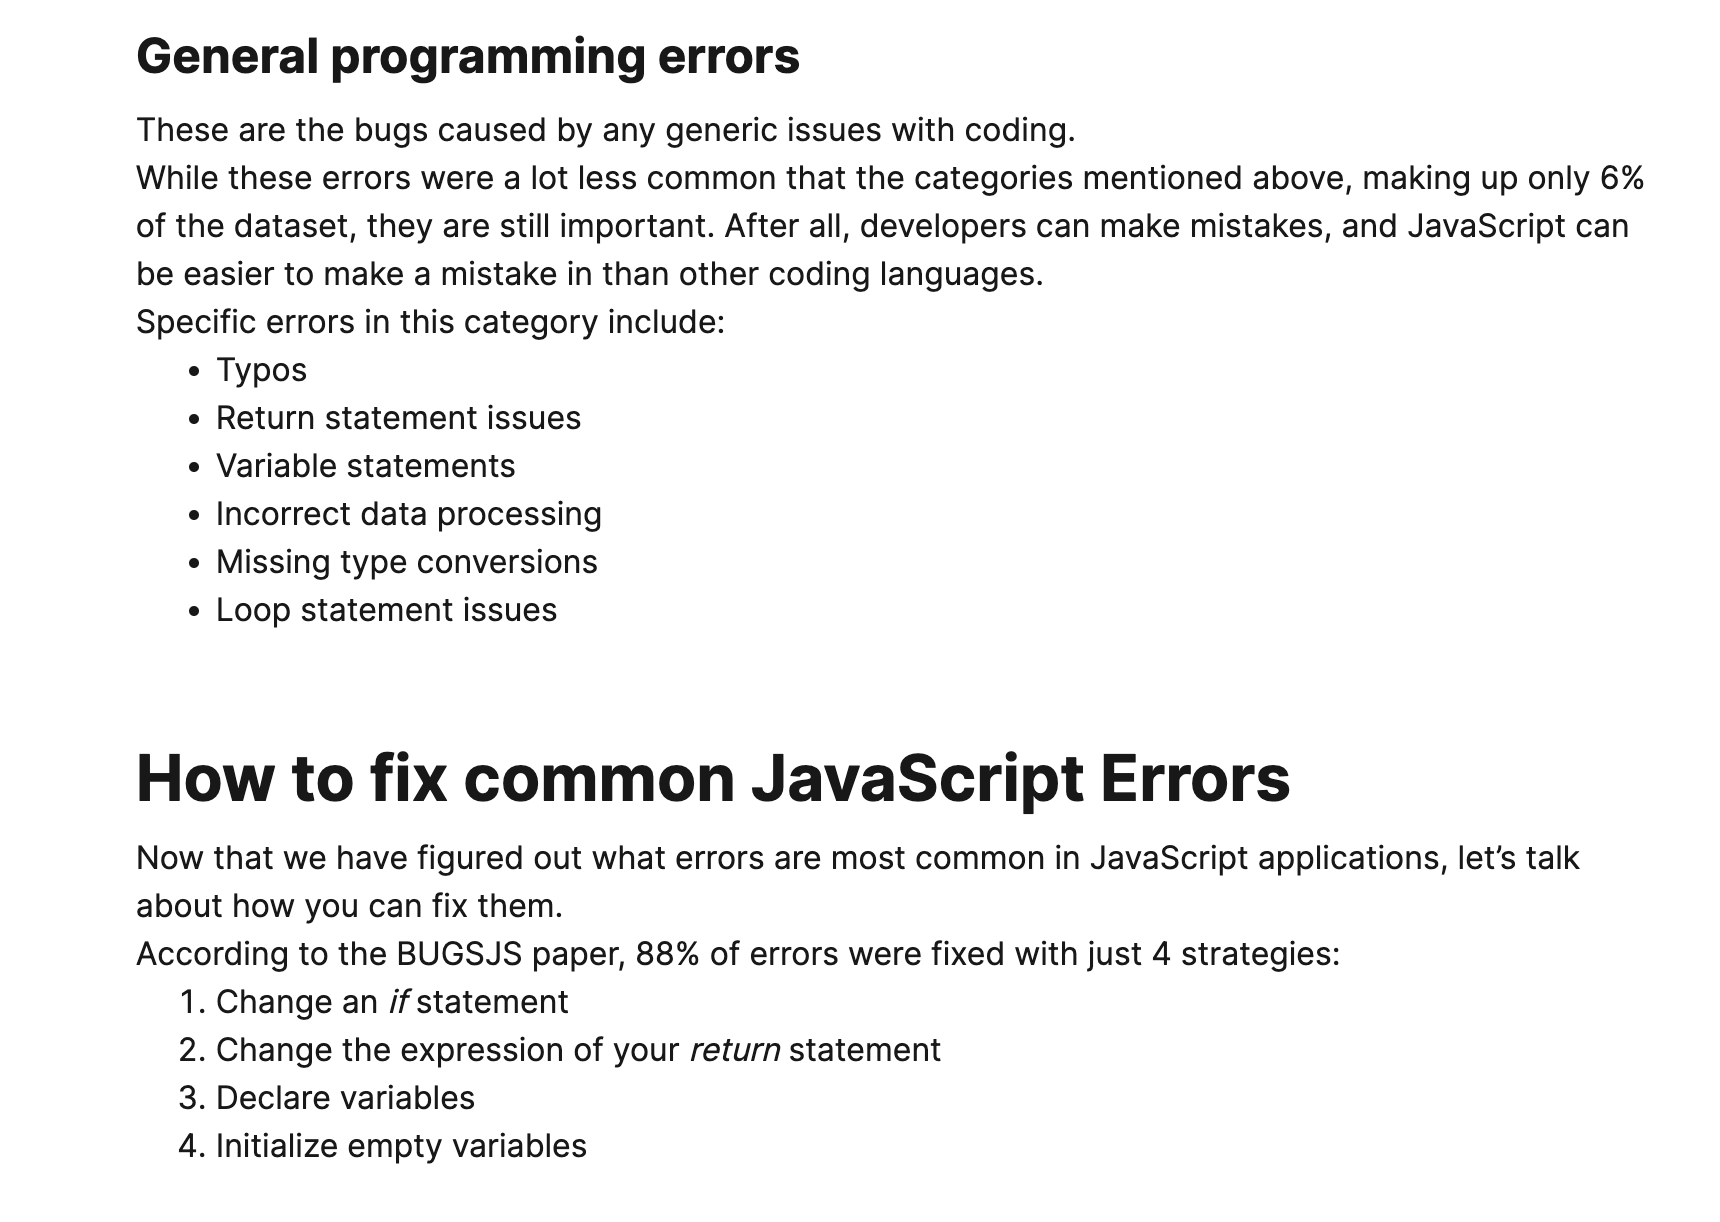 Screenshot 1 from our article for a past client, Railtown.ai, on common causes of JavaScript errors.